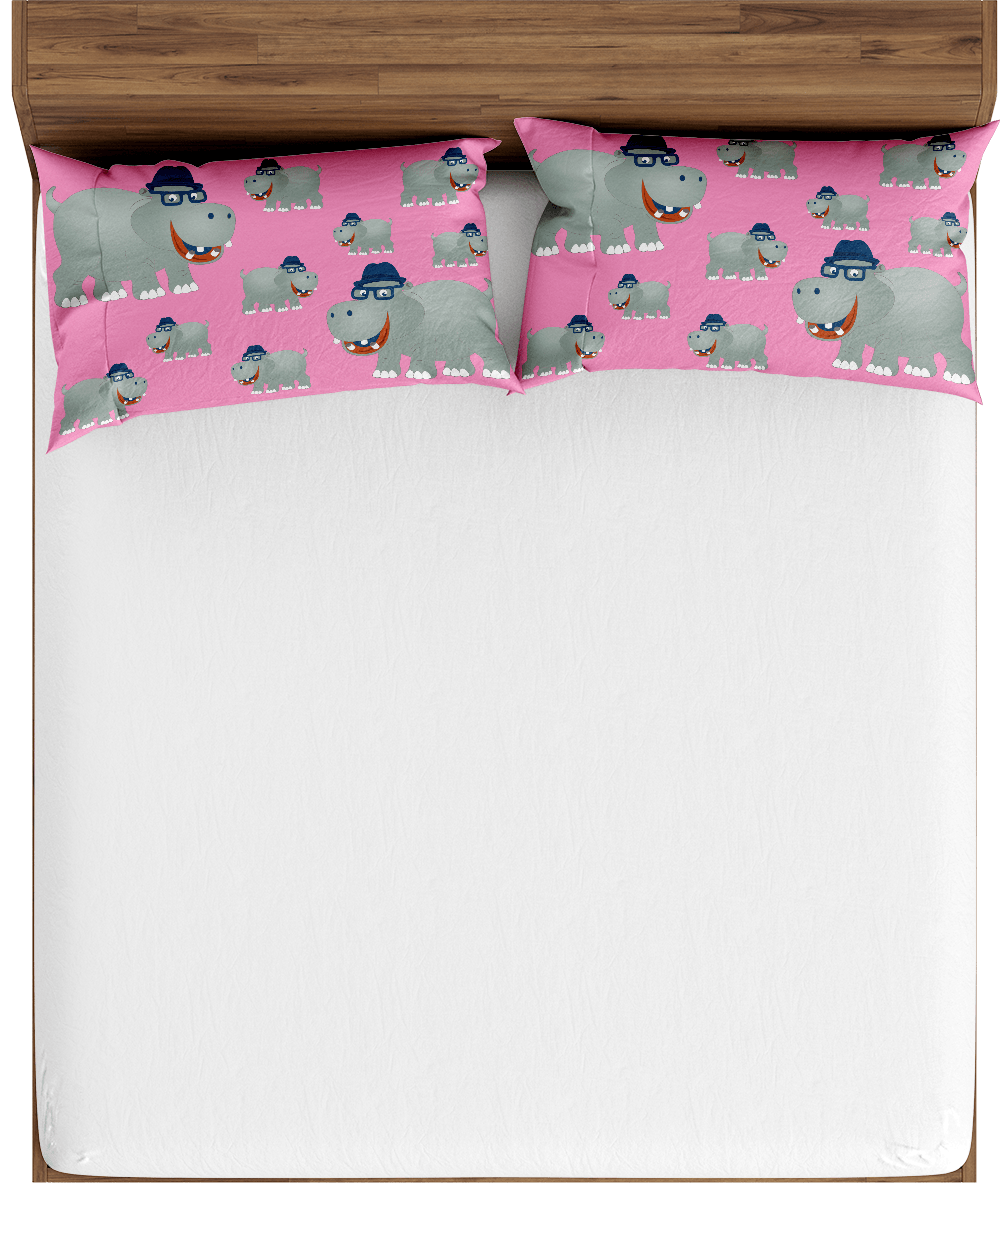 Hungry Hippo Bed Pillows - fungear.com.au